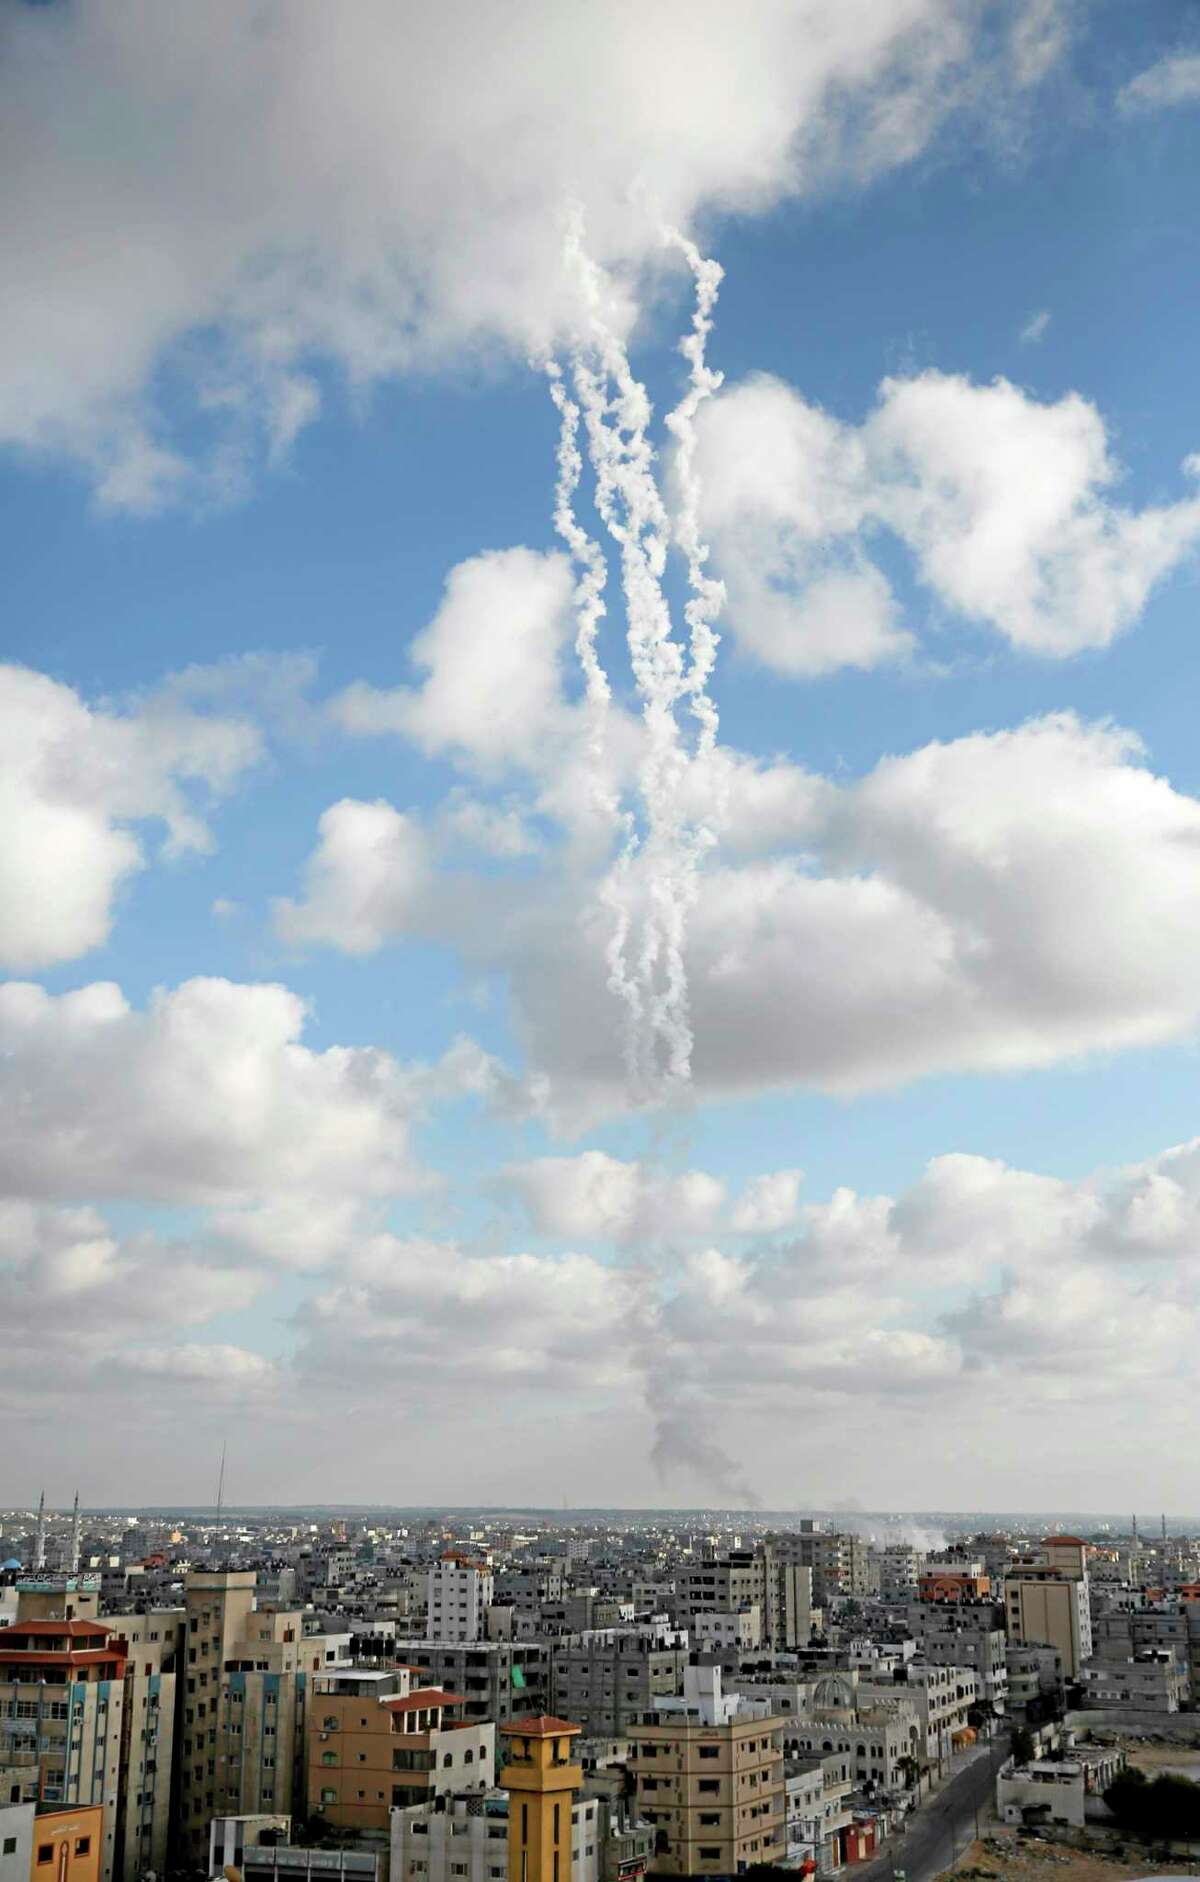 The smoke trail of multiple missiles fired by Palestinian militants from inside northern Gaza Strip, is seen as they make their way towards Israel, Friday, July 18, 2014. Israeli troops pushed deeper into Gaza on Friday to destroy rocket launching sites and tunnels, firing volleys of tank shells and clashing with Palestinian fighters in a high-stakes ground offensive meant to weaken the enclave's Hamas rulers.(AP Photo/Lefteris Pitarakis)